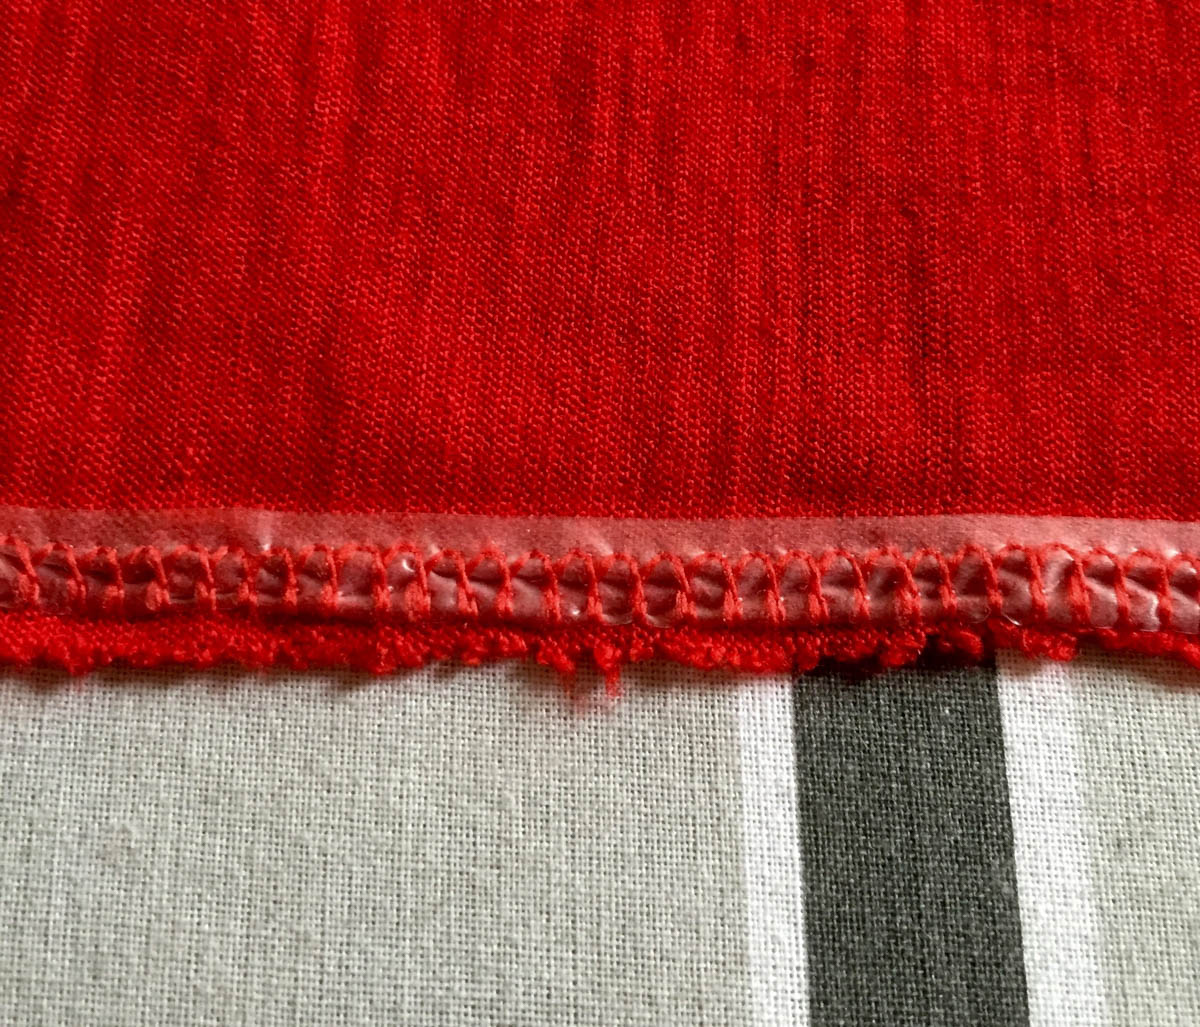 Tip for sewing stretchy, stable hems on knits - stitch pressed flat